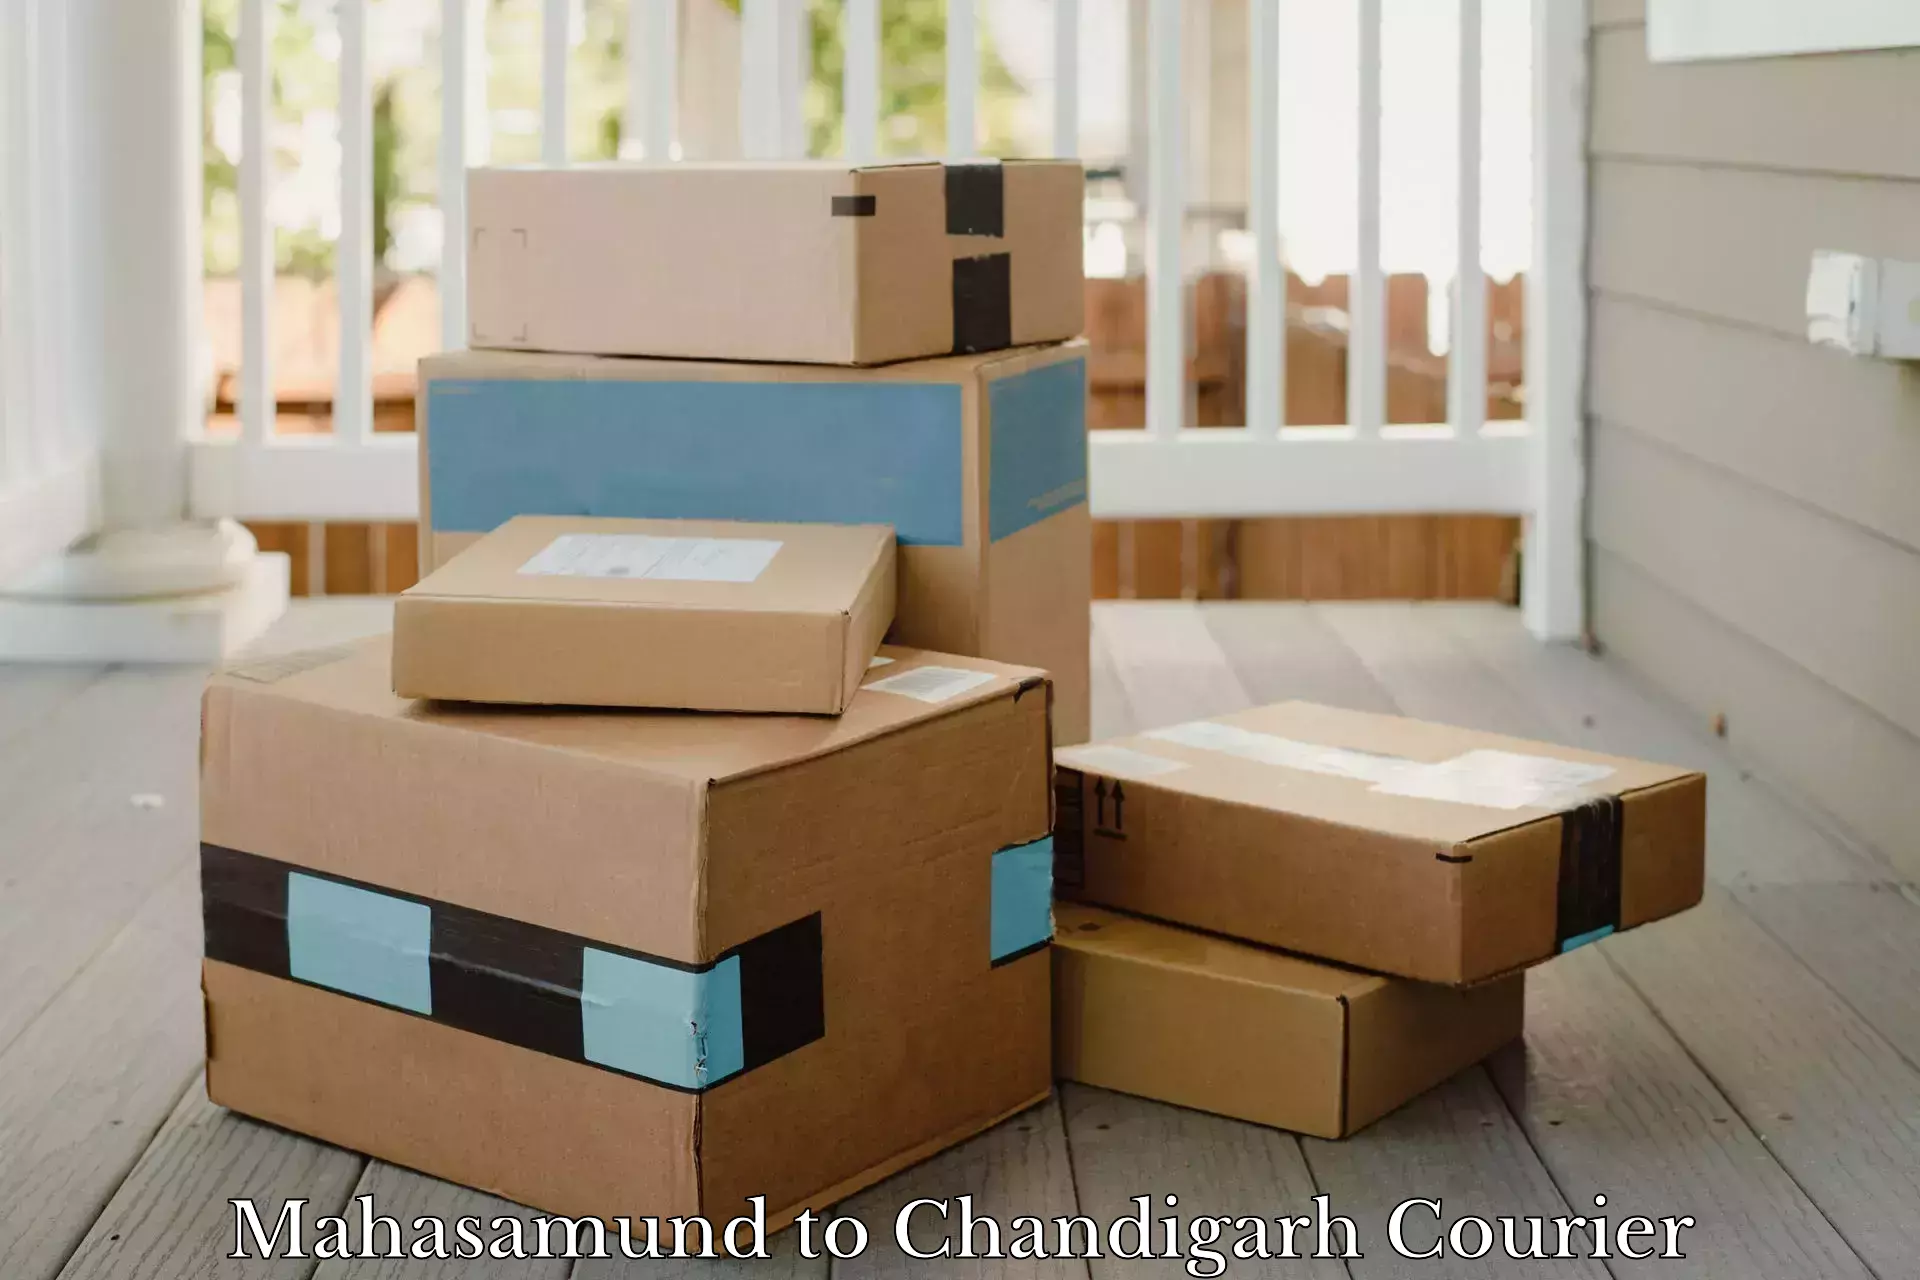 End-to-end delivery Mahasamund to Chandigarh